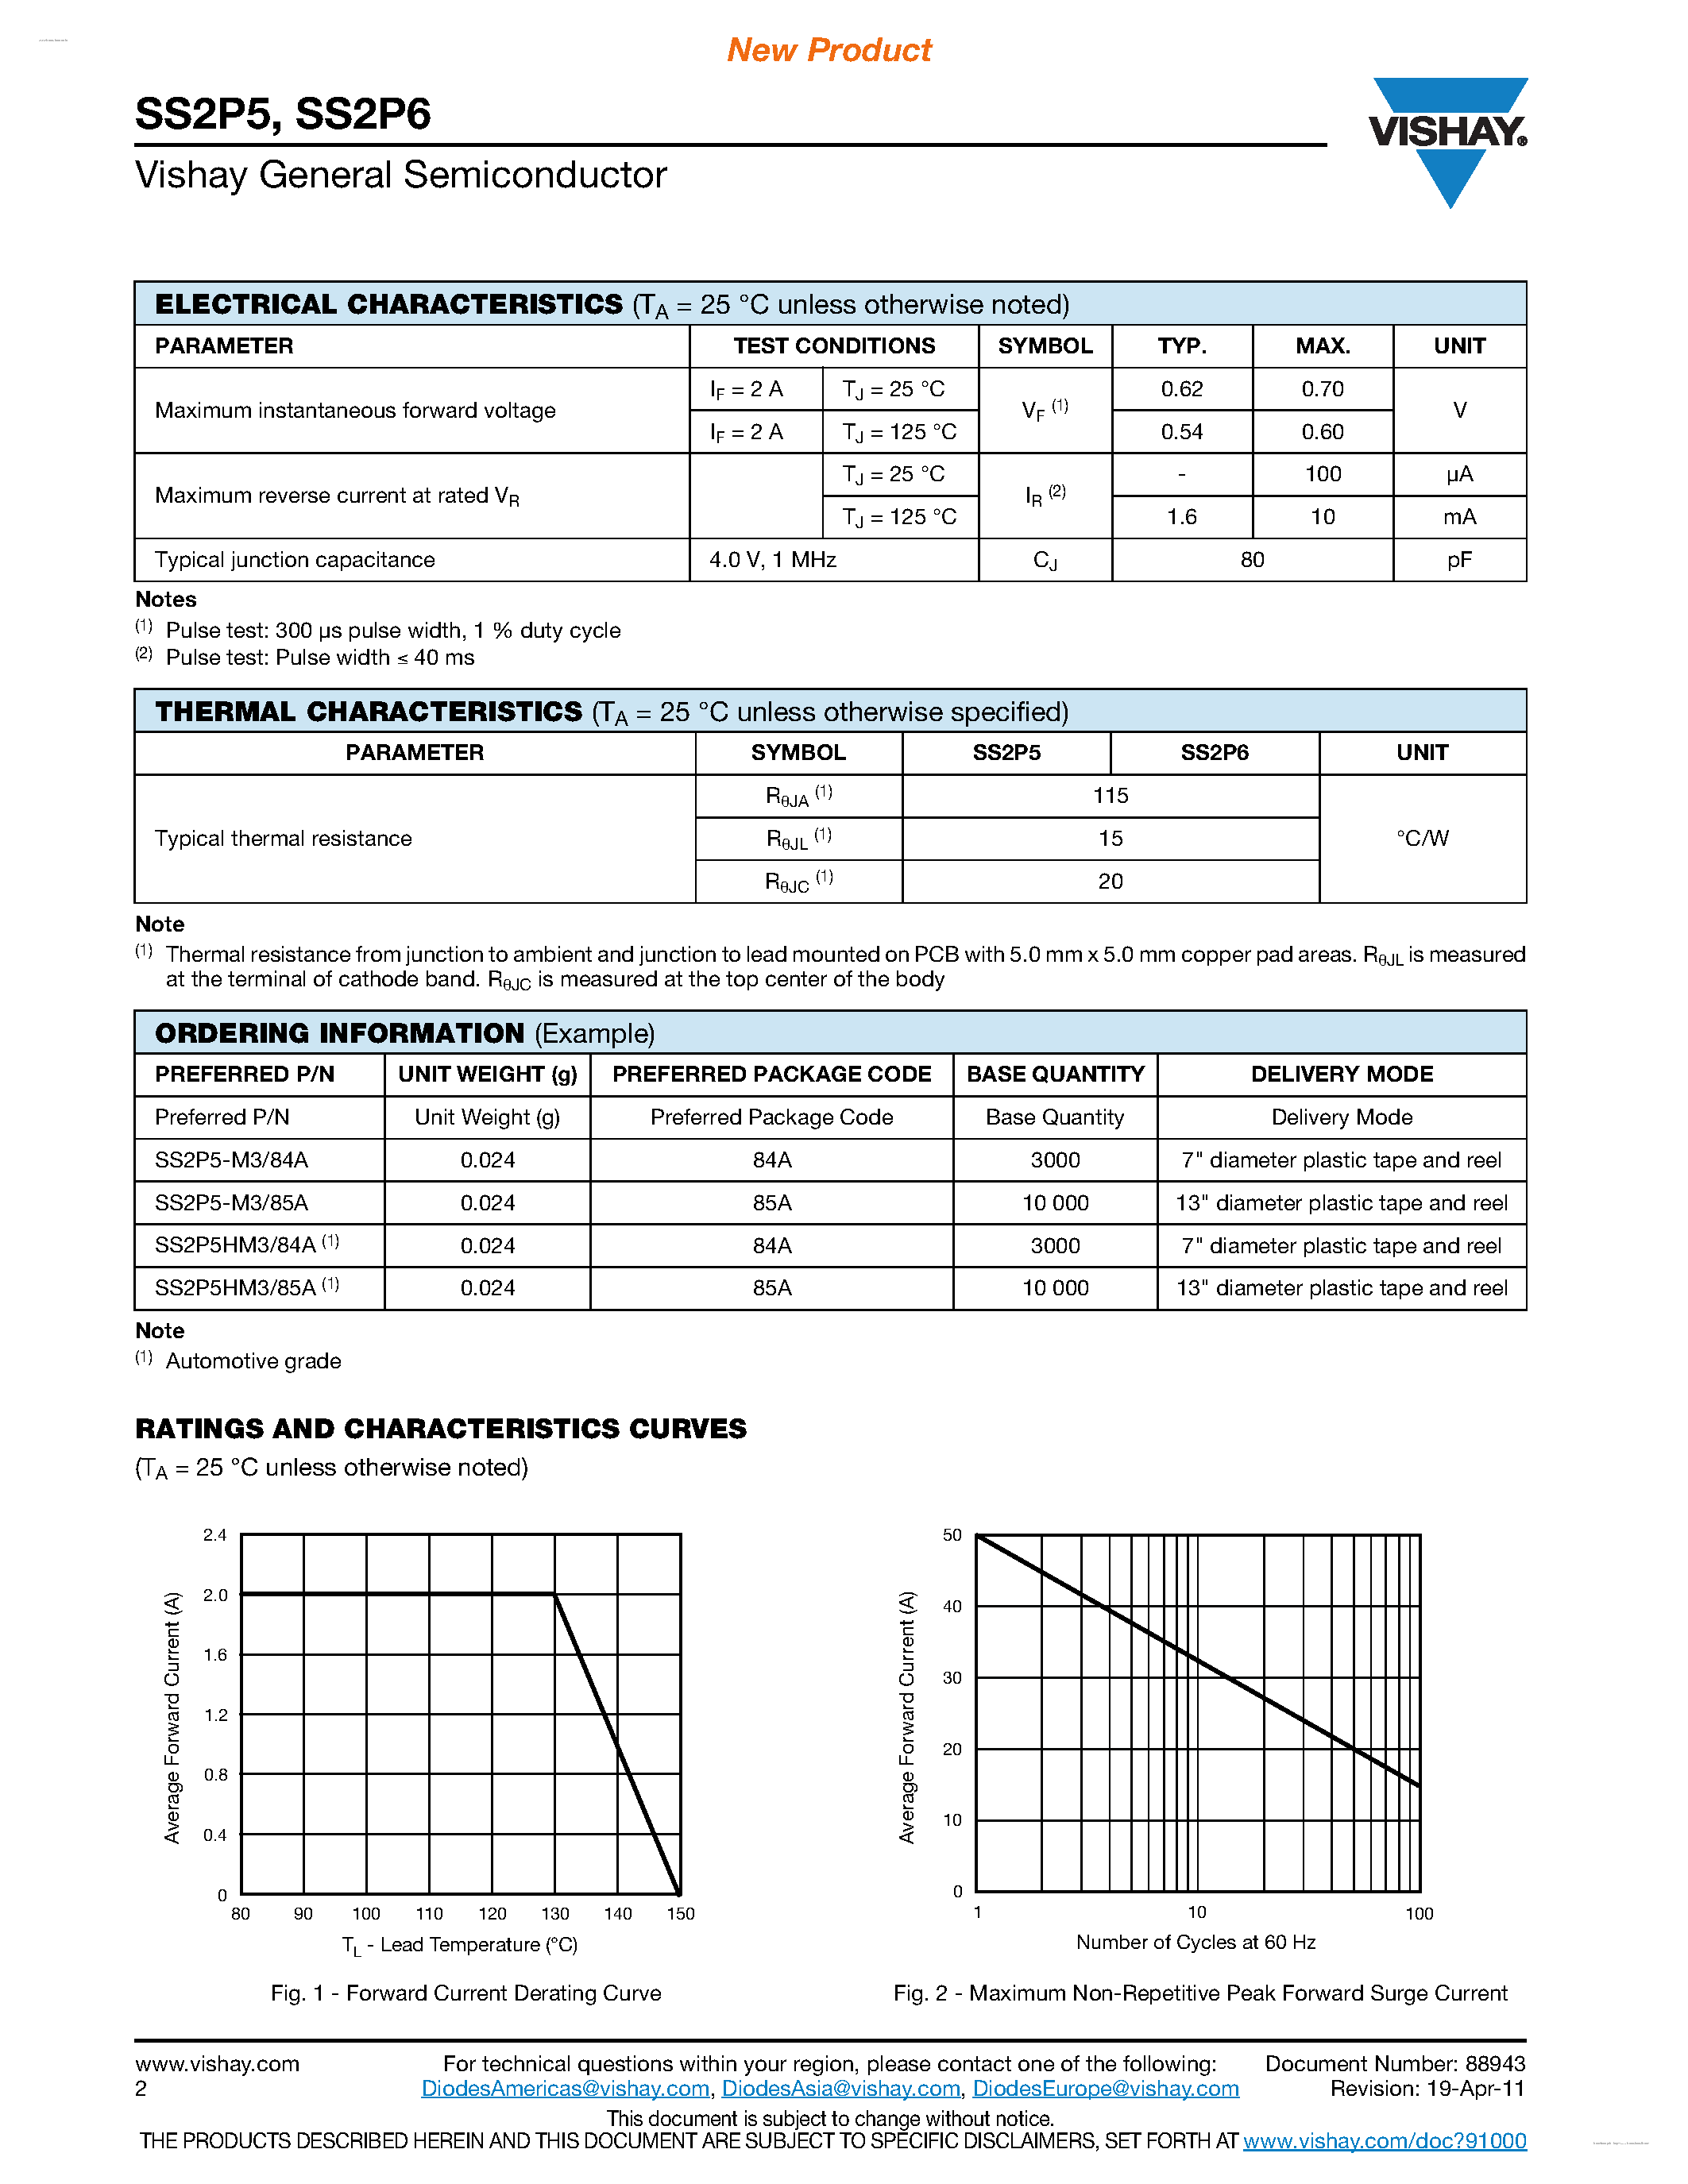 Datasheet SS2P5 - (SS2P5 / SS2P6) High Current Density Surface Mount Schottky Barrier Rectifiers page 2